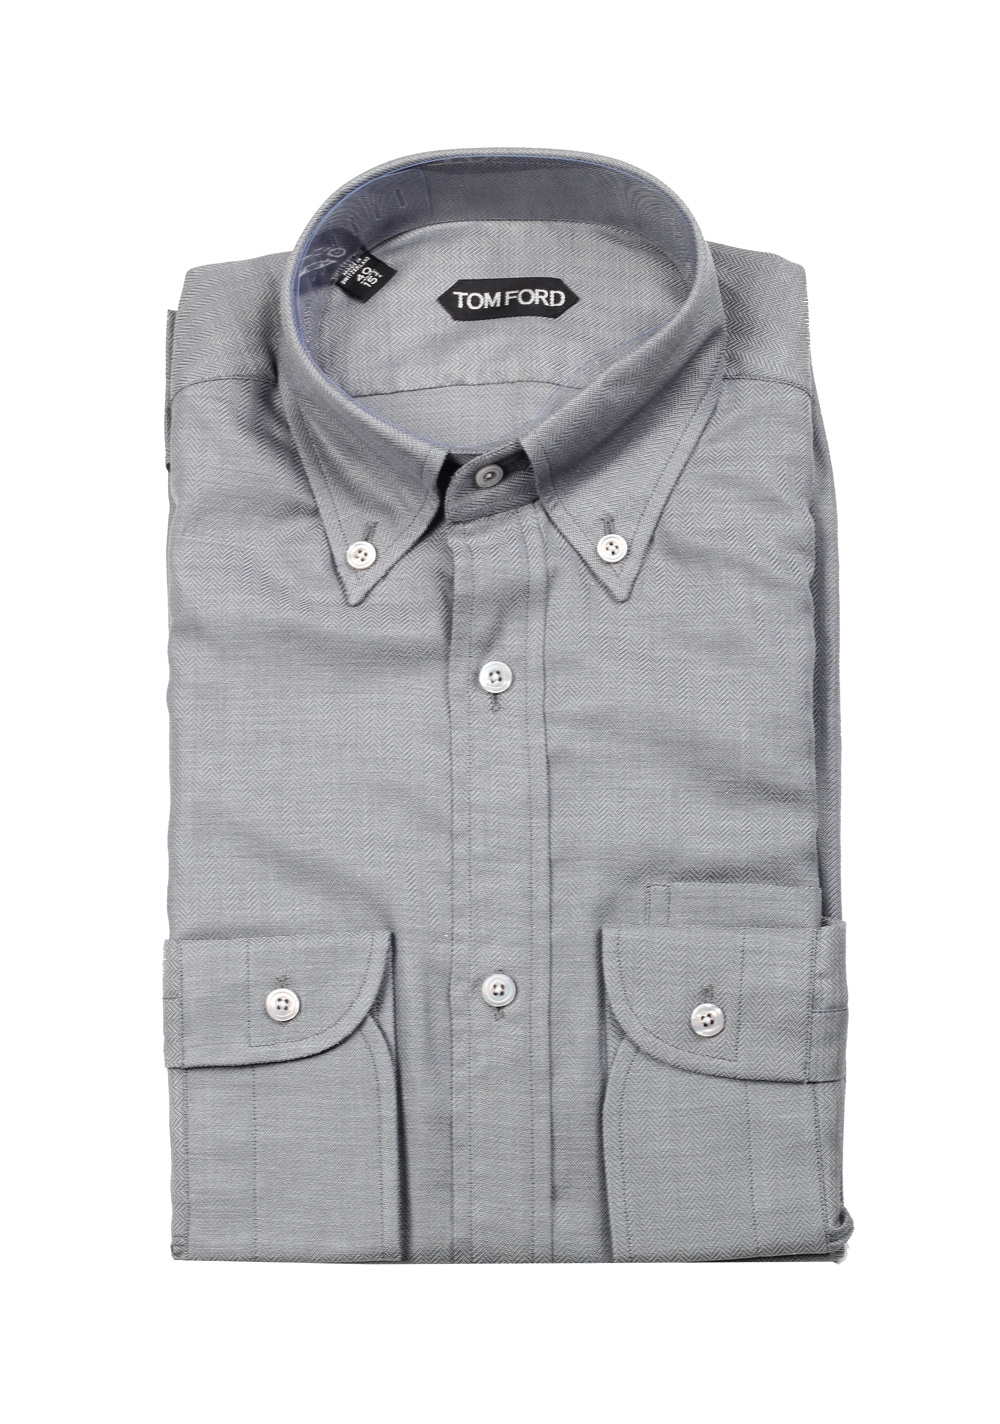 TOM FORD Solid Gray Shirt Size 40 / 15,75 U.S. | Costume Limité